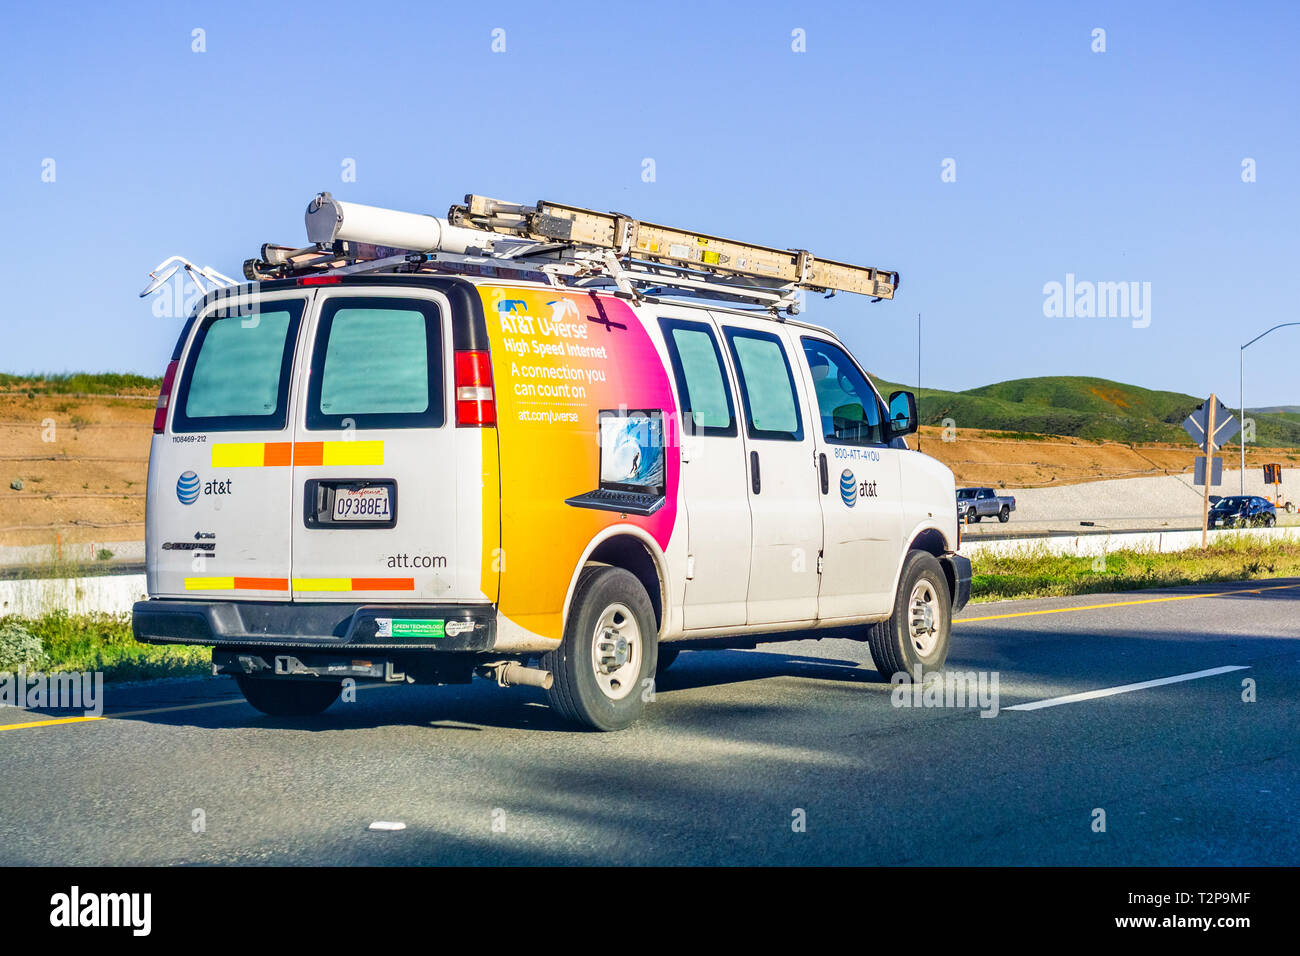 March 16, 2019 Los Angeles / CA / USA - AT&T service vans driving on the freeway; emblem displayed on the side Stock Photo